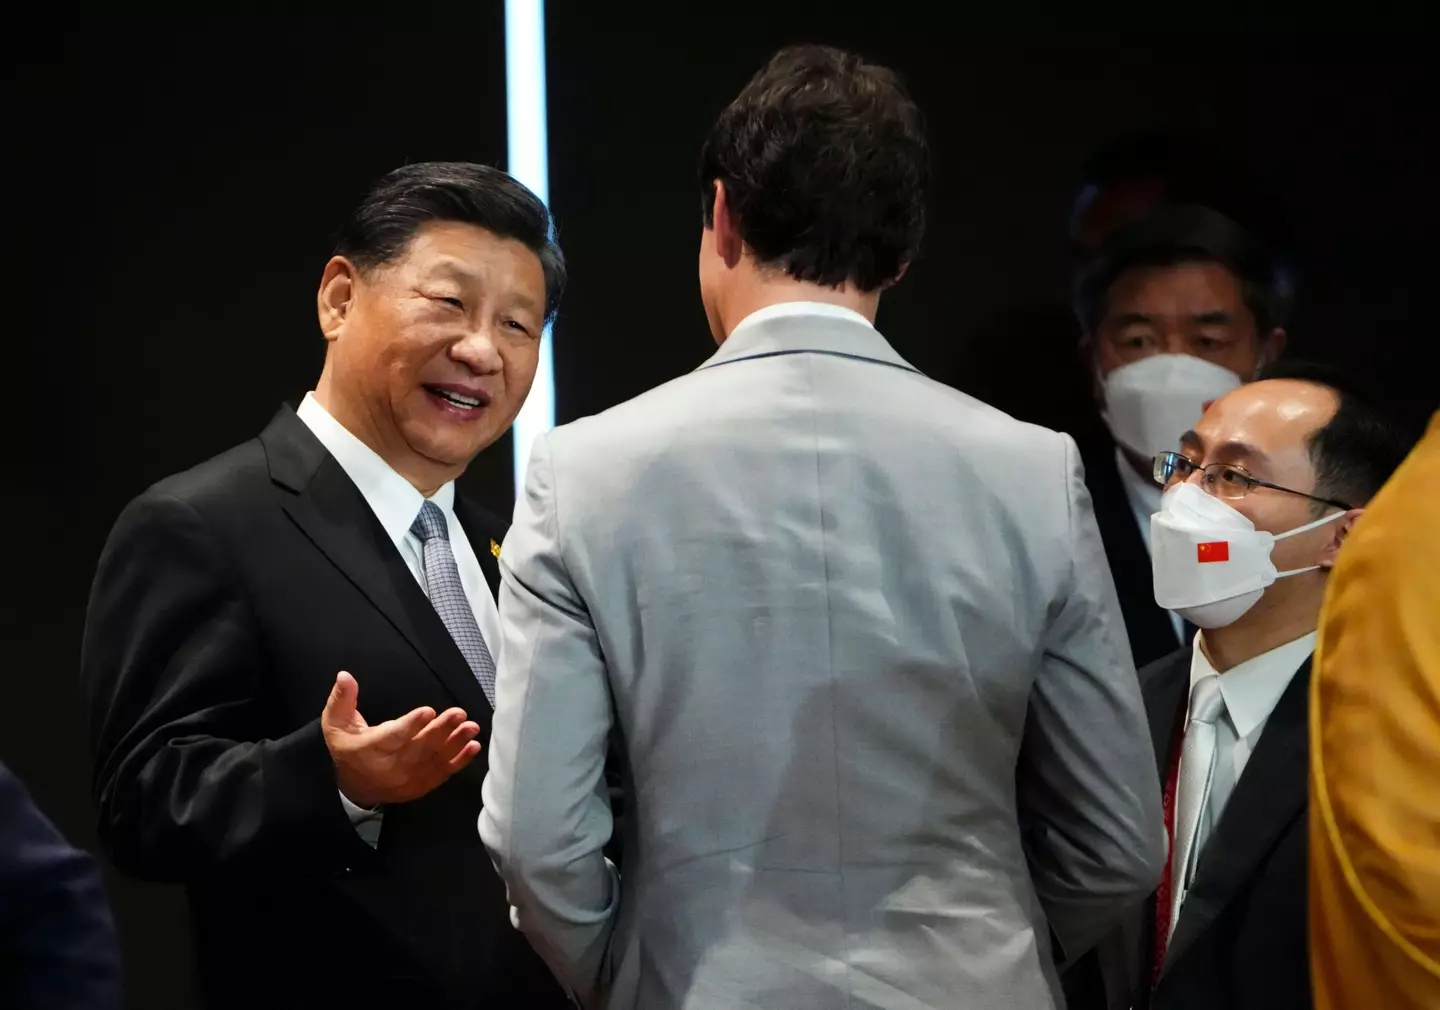 The Chinese president accused Trudeau of leaking sensitive information to the media.